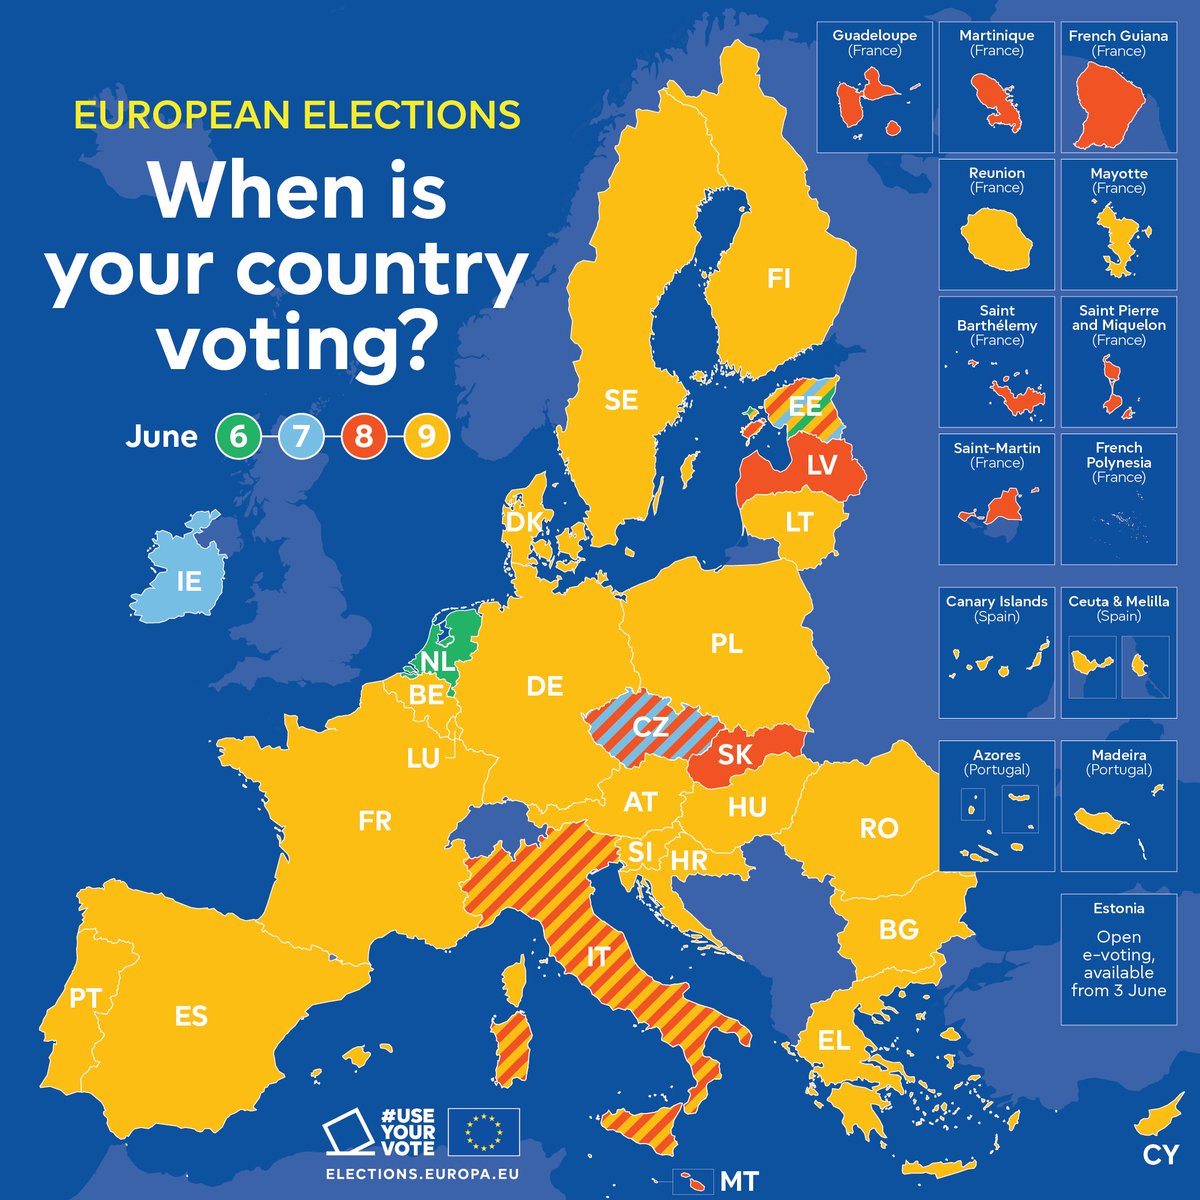 On 6-9 June, Europeans will choose the 720 members of the European Parliament that will represent them for the next five years.️ Check this map below to see when you can cast your vote 👇